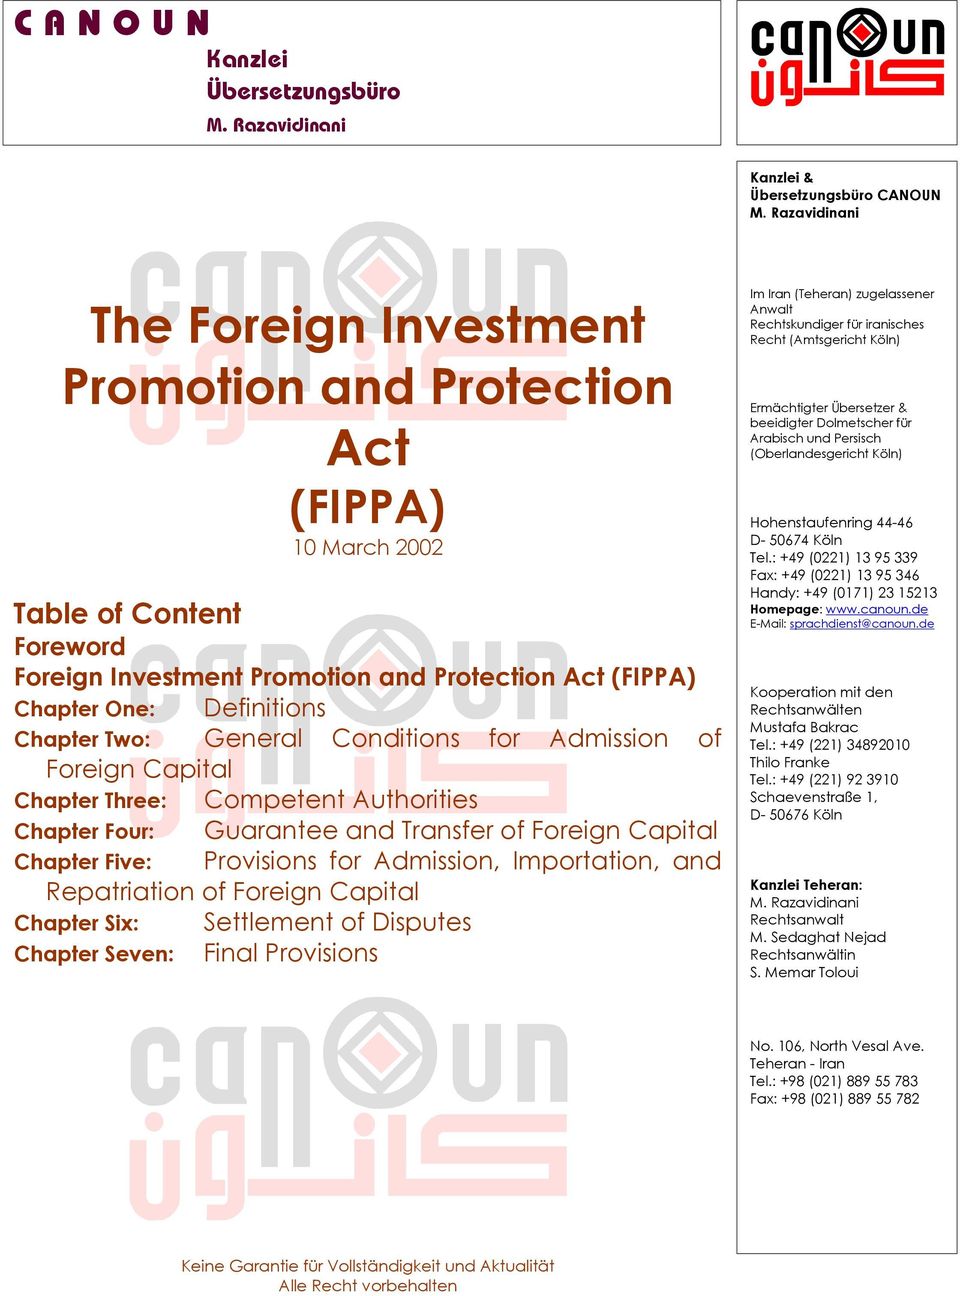 Foreign Capital Chapter Three: Competent Authorities Guarantee and Transfer of Foreign Capital Provisions for Admission,